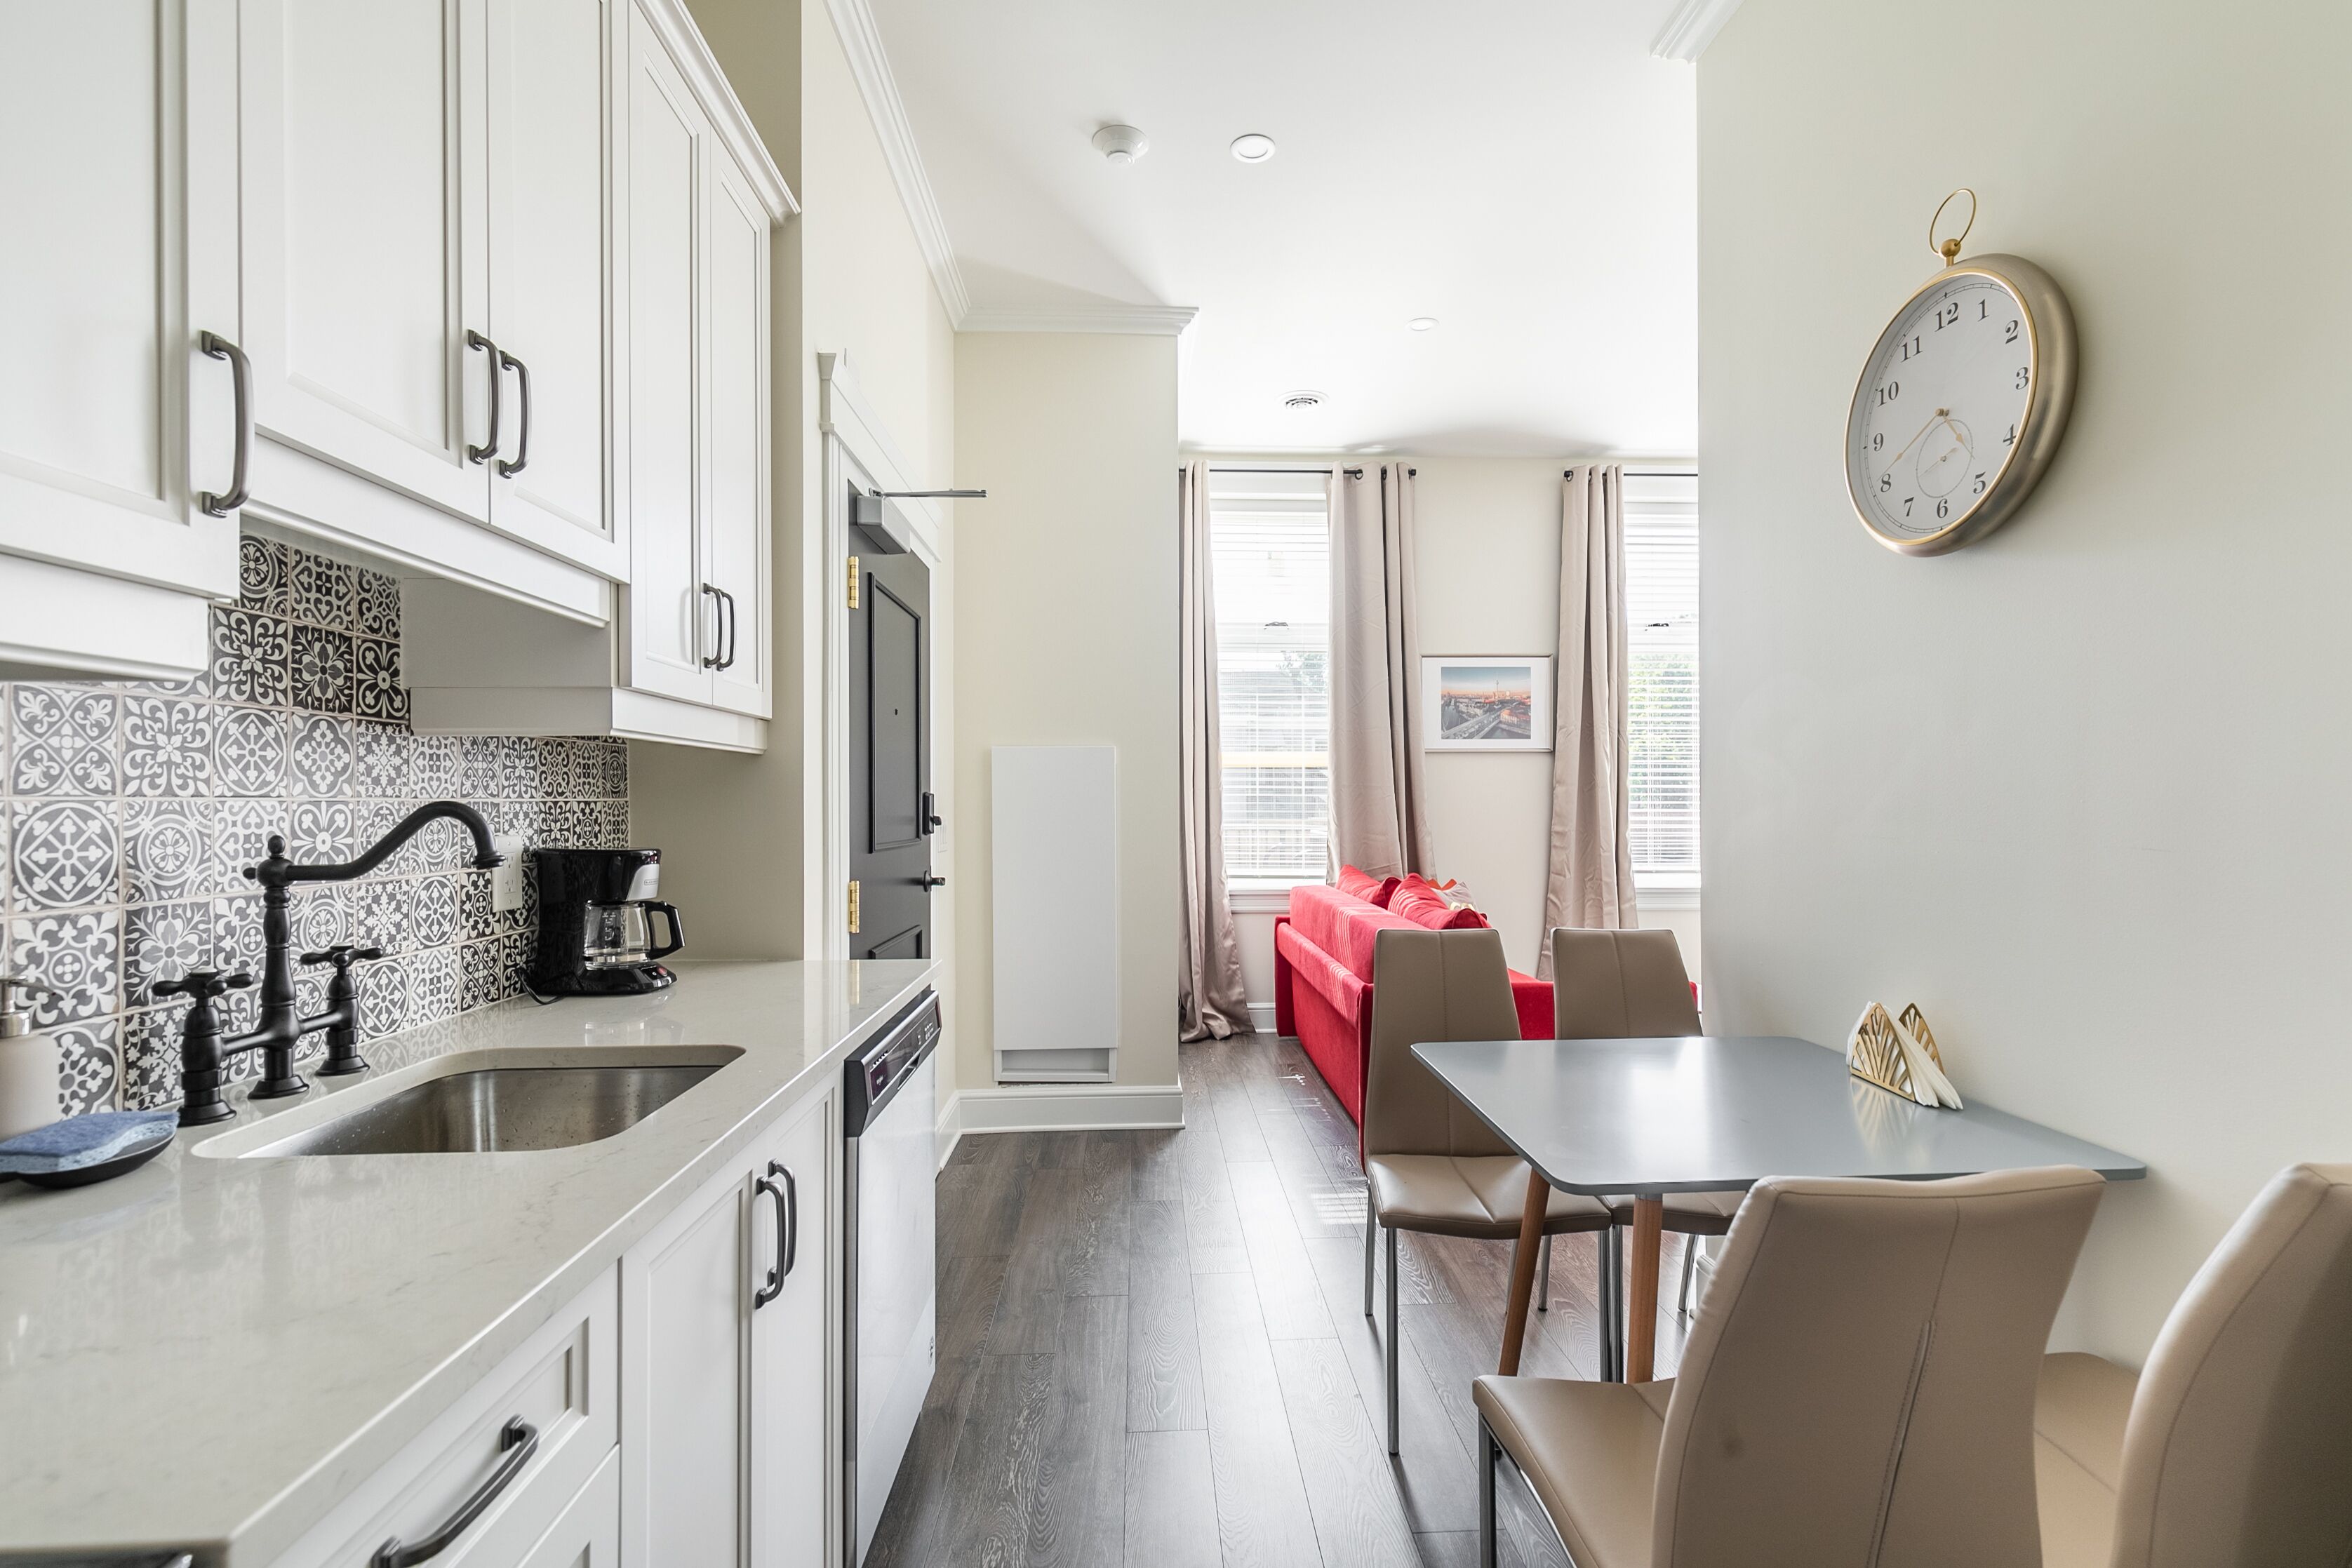 Luxury Rideau Apartments by Simply Comfort